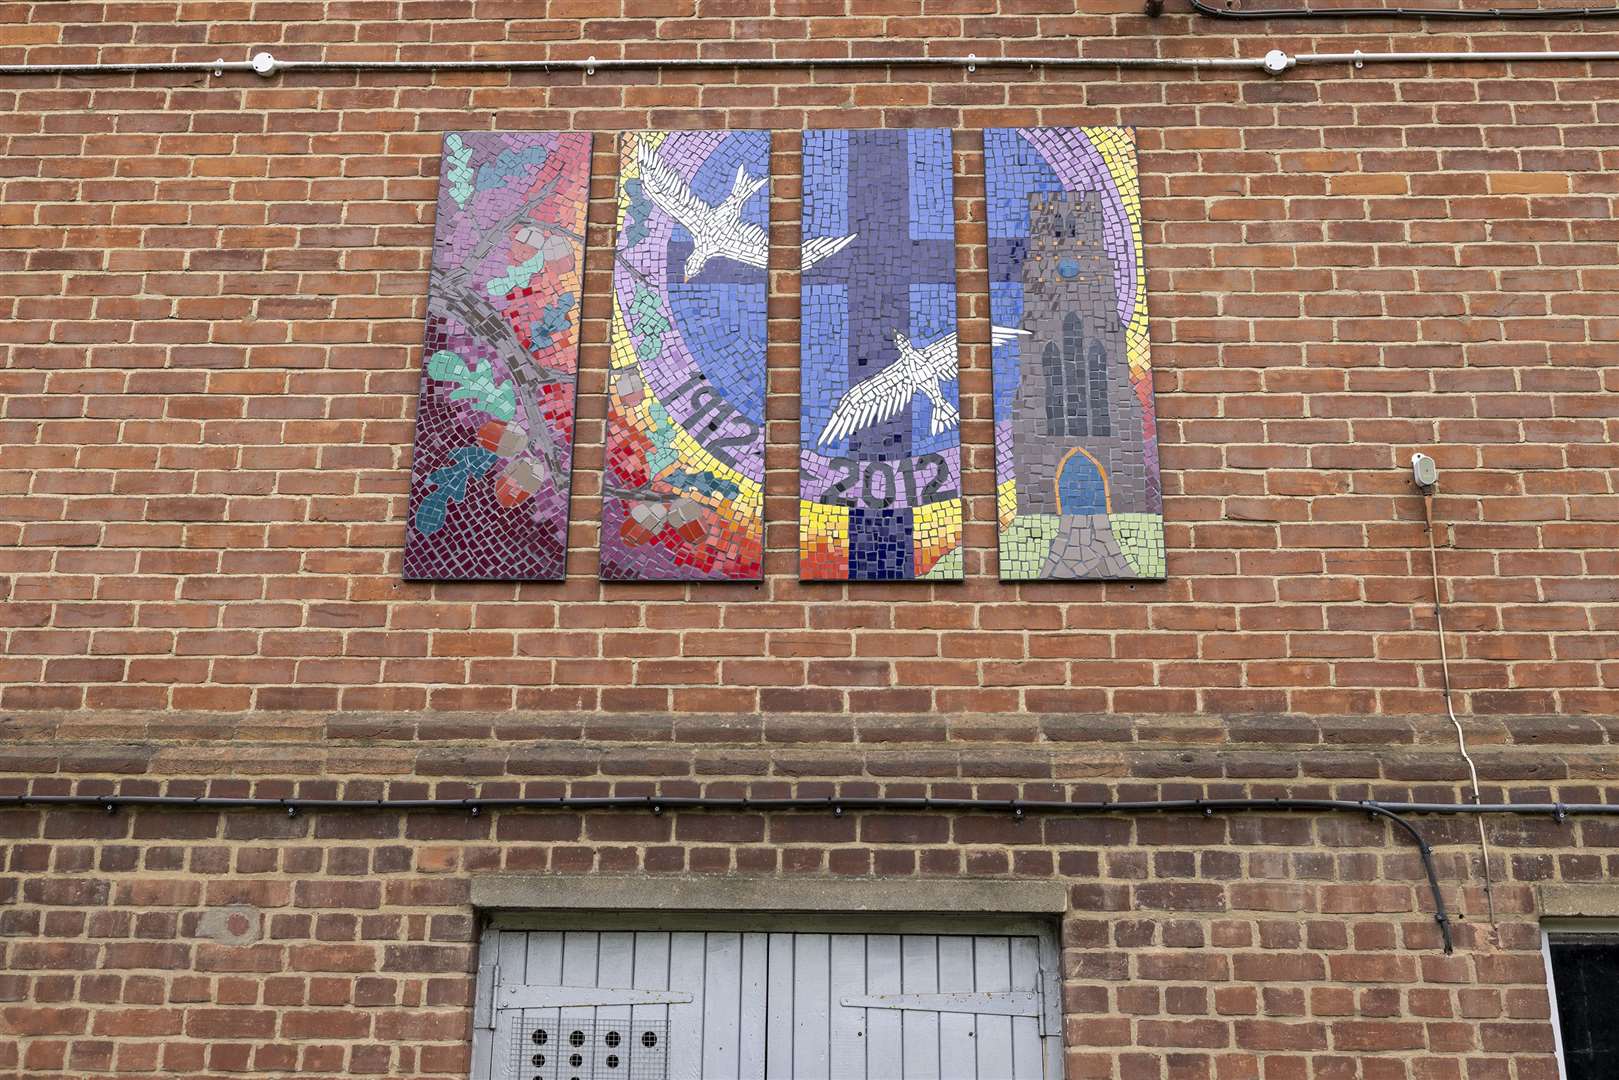 The pupil's mosaic at the old Platt Primary School